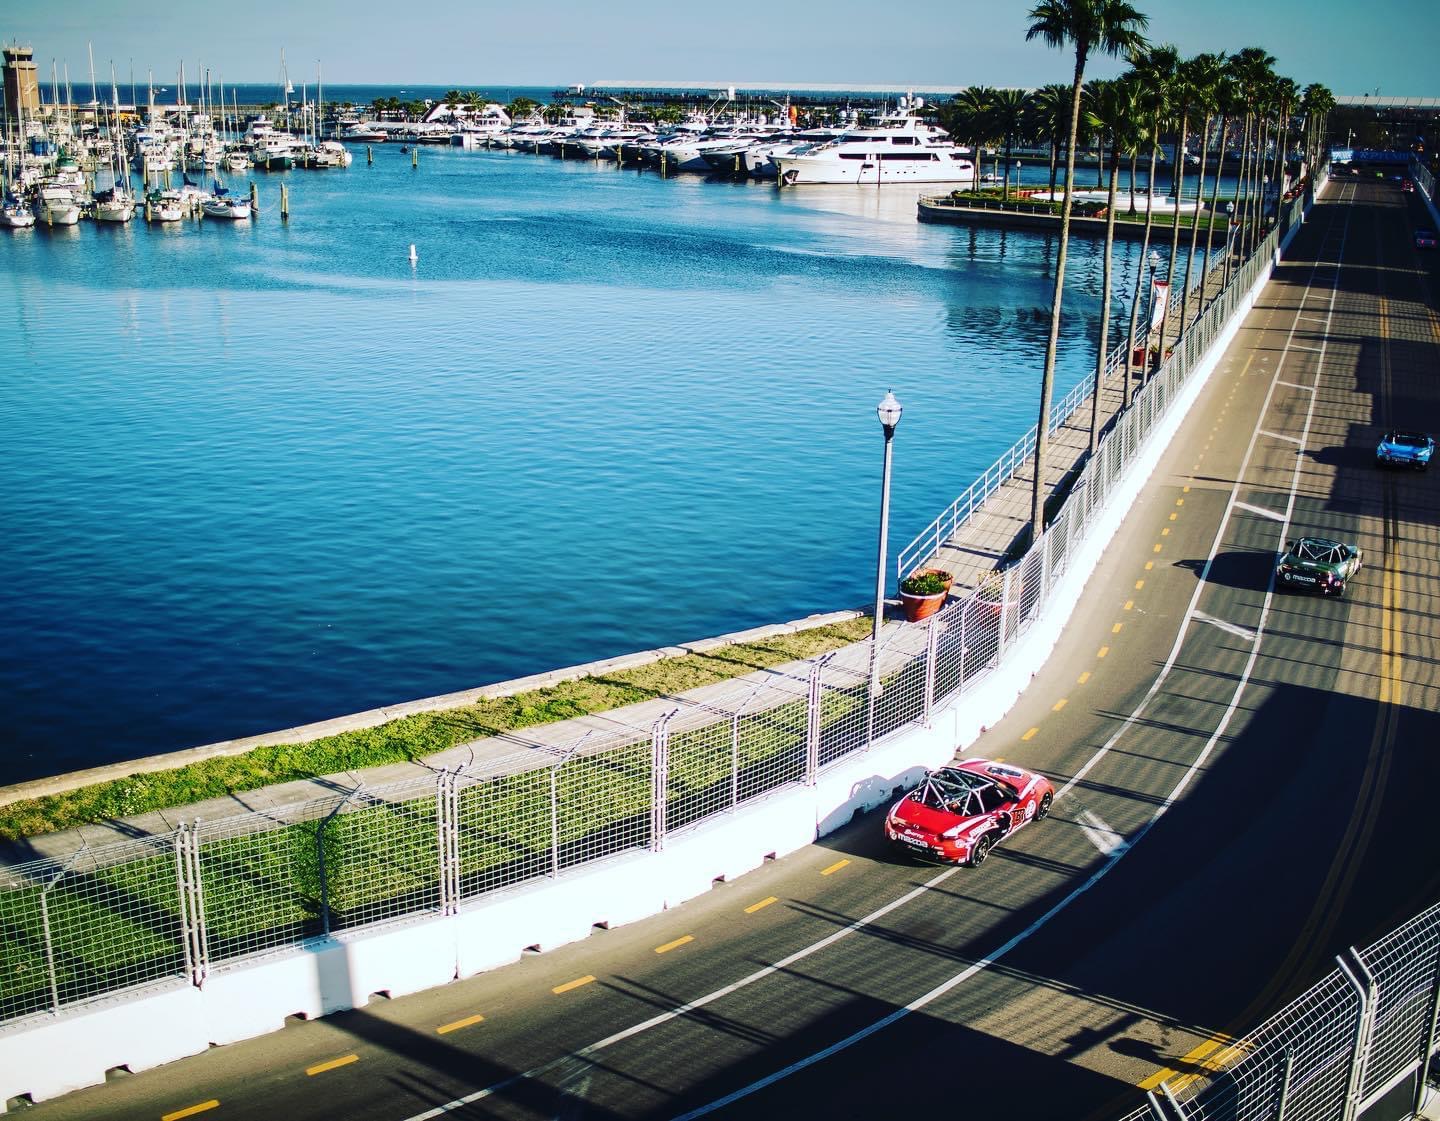 A sneak peek of the view from St. Pete!